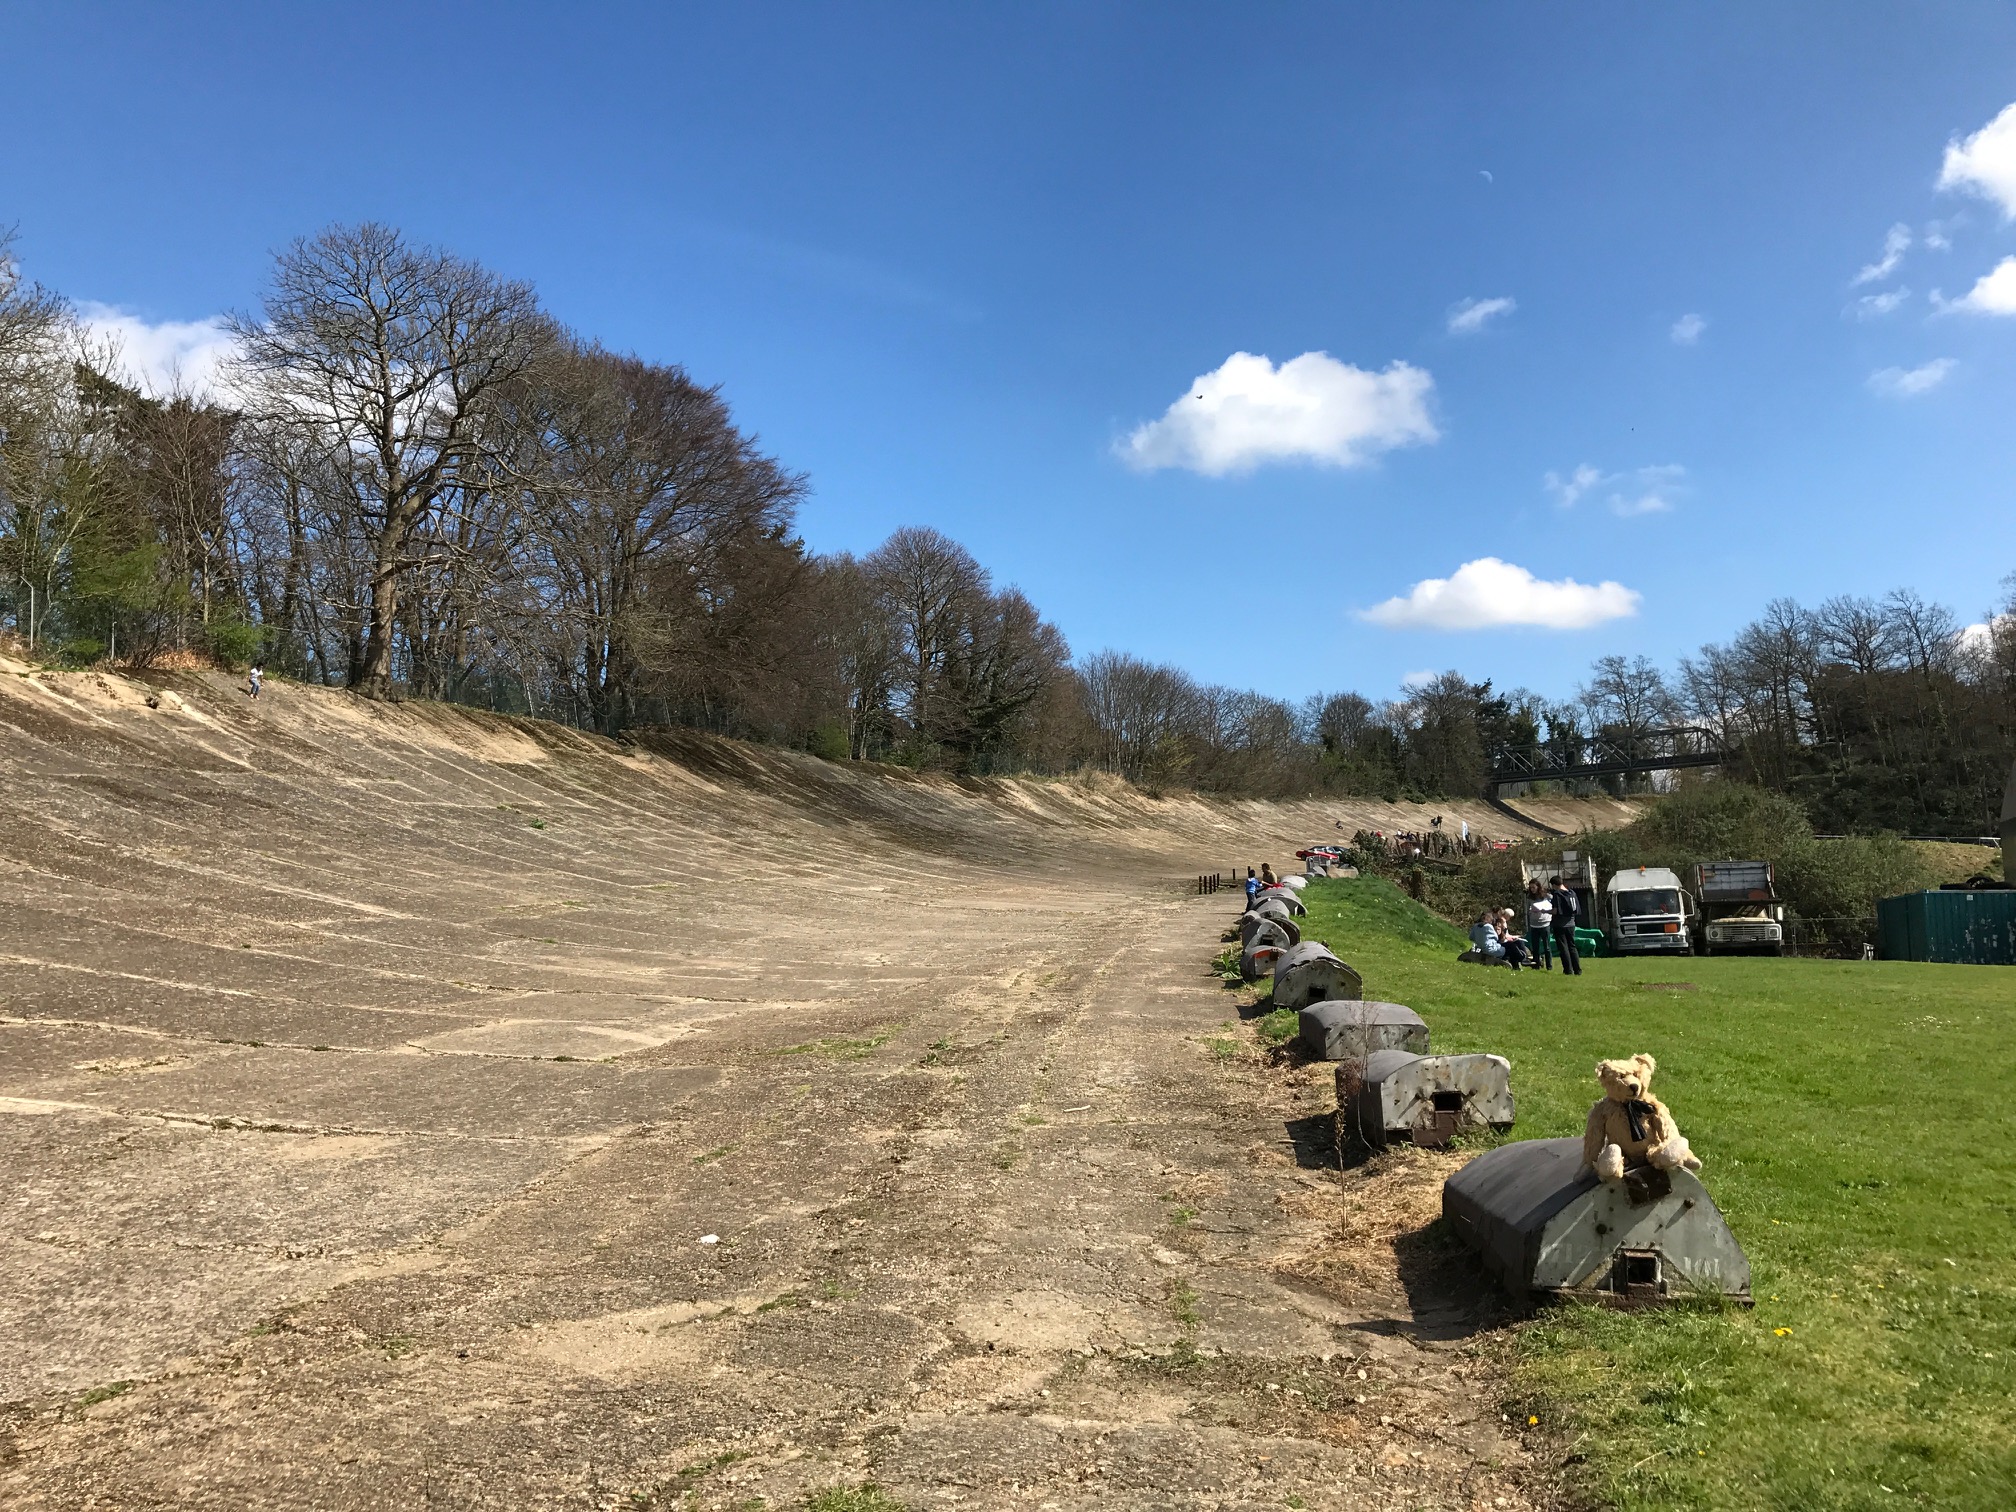 Brooklands: The world famous banking, where world record speeds were broken. Enormous Bentleys thundered round the top and some disappeared forever over the top. Mad days between the wars.